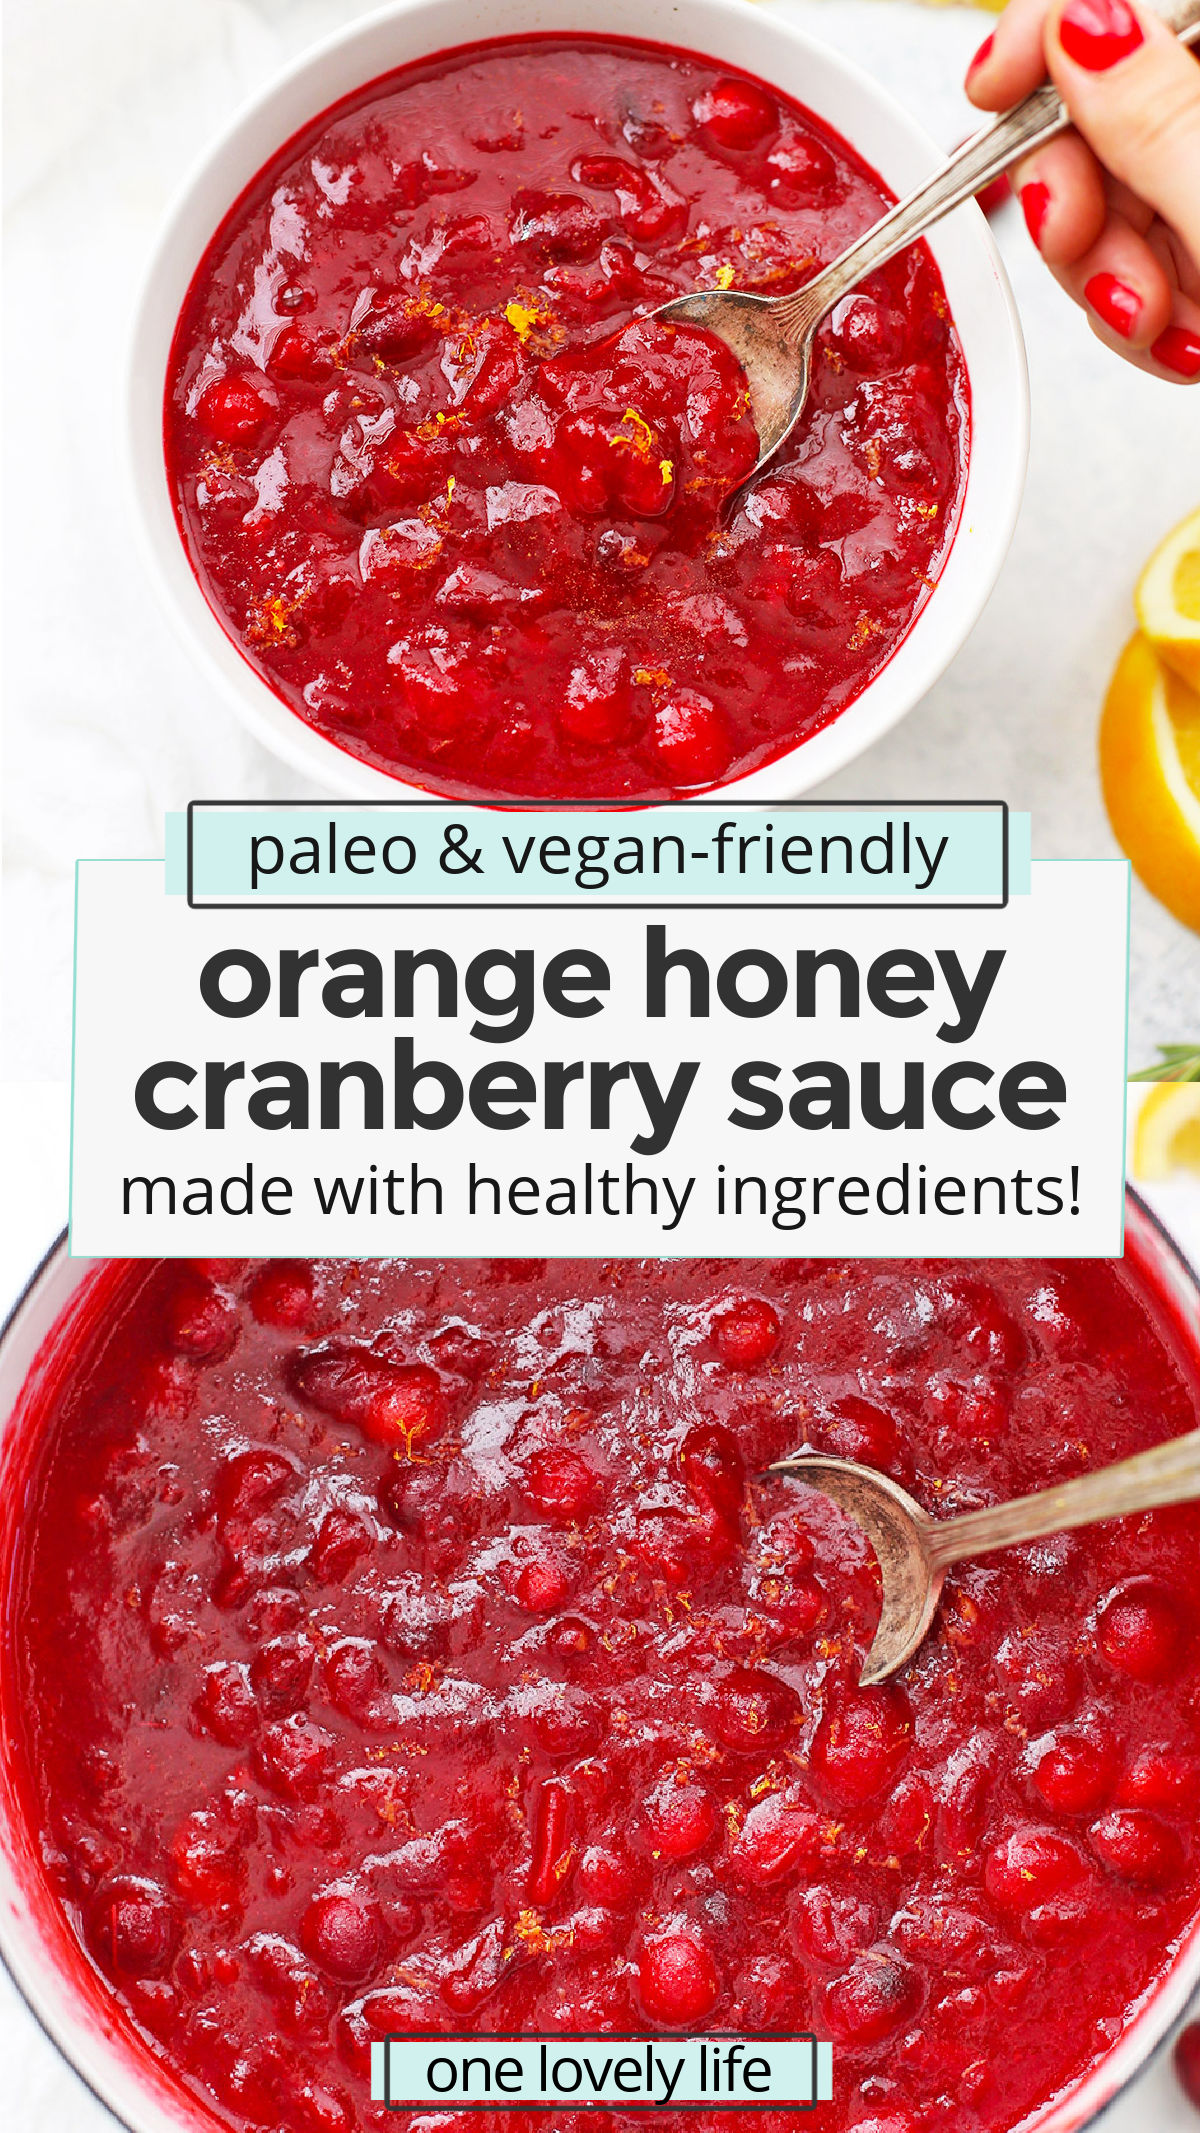 Orange Honey Cranberry Sauce - This paleo cranberry sauce can also easily be made vegan. With bright citrus notes and a hint of cinnamon, this naturally sweetened cranberry sauce is the perfect addition to the holiday table. // orange cranberry sauce recipe // Paleo thanksgiving // vegan thanksgiving // gluten-free thanksgiving #cranberrysauce #paleo #vegan #glutenfree